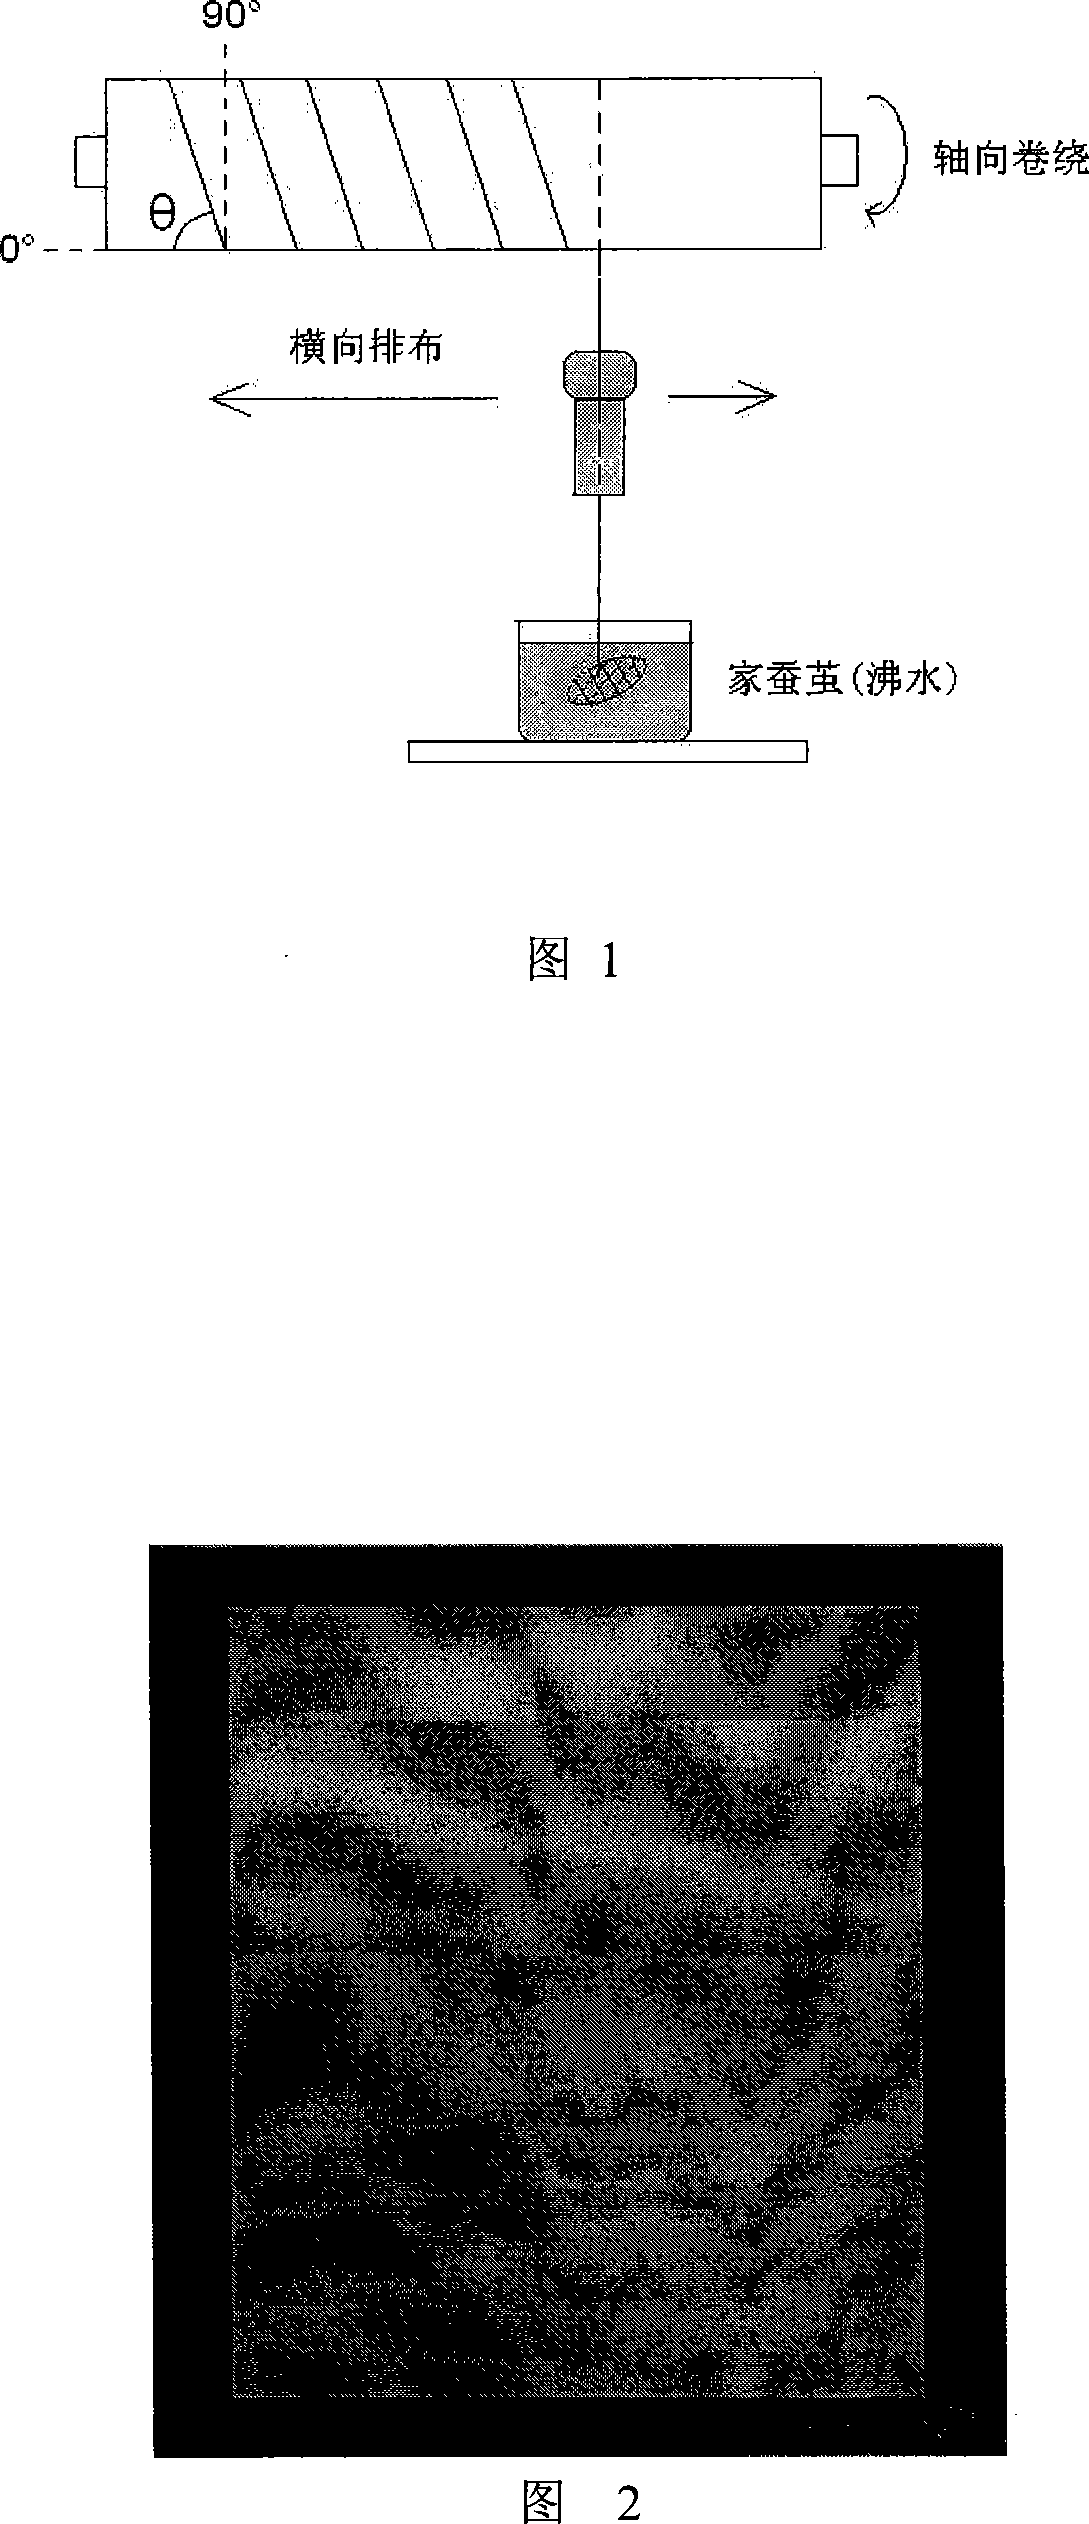 Total-fibroin albumen composite material and preparation method thereof